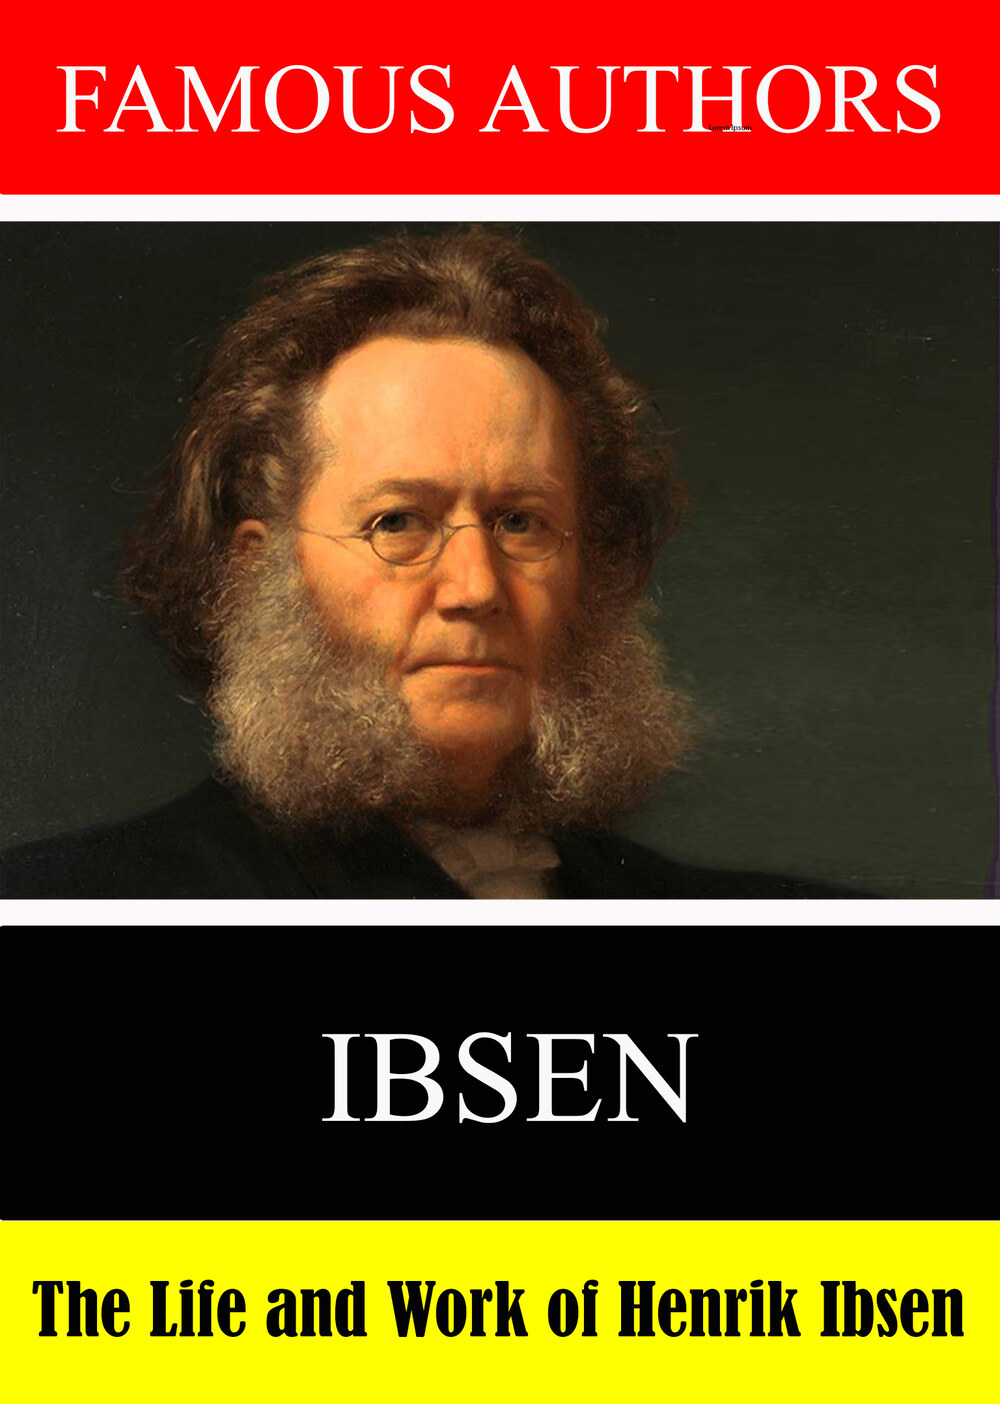 L7891 - Famous Authors: The Life and Work of Henrik Ibsen